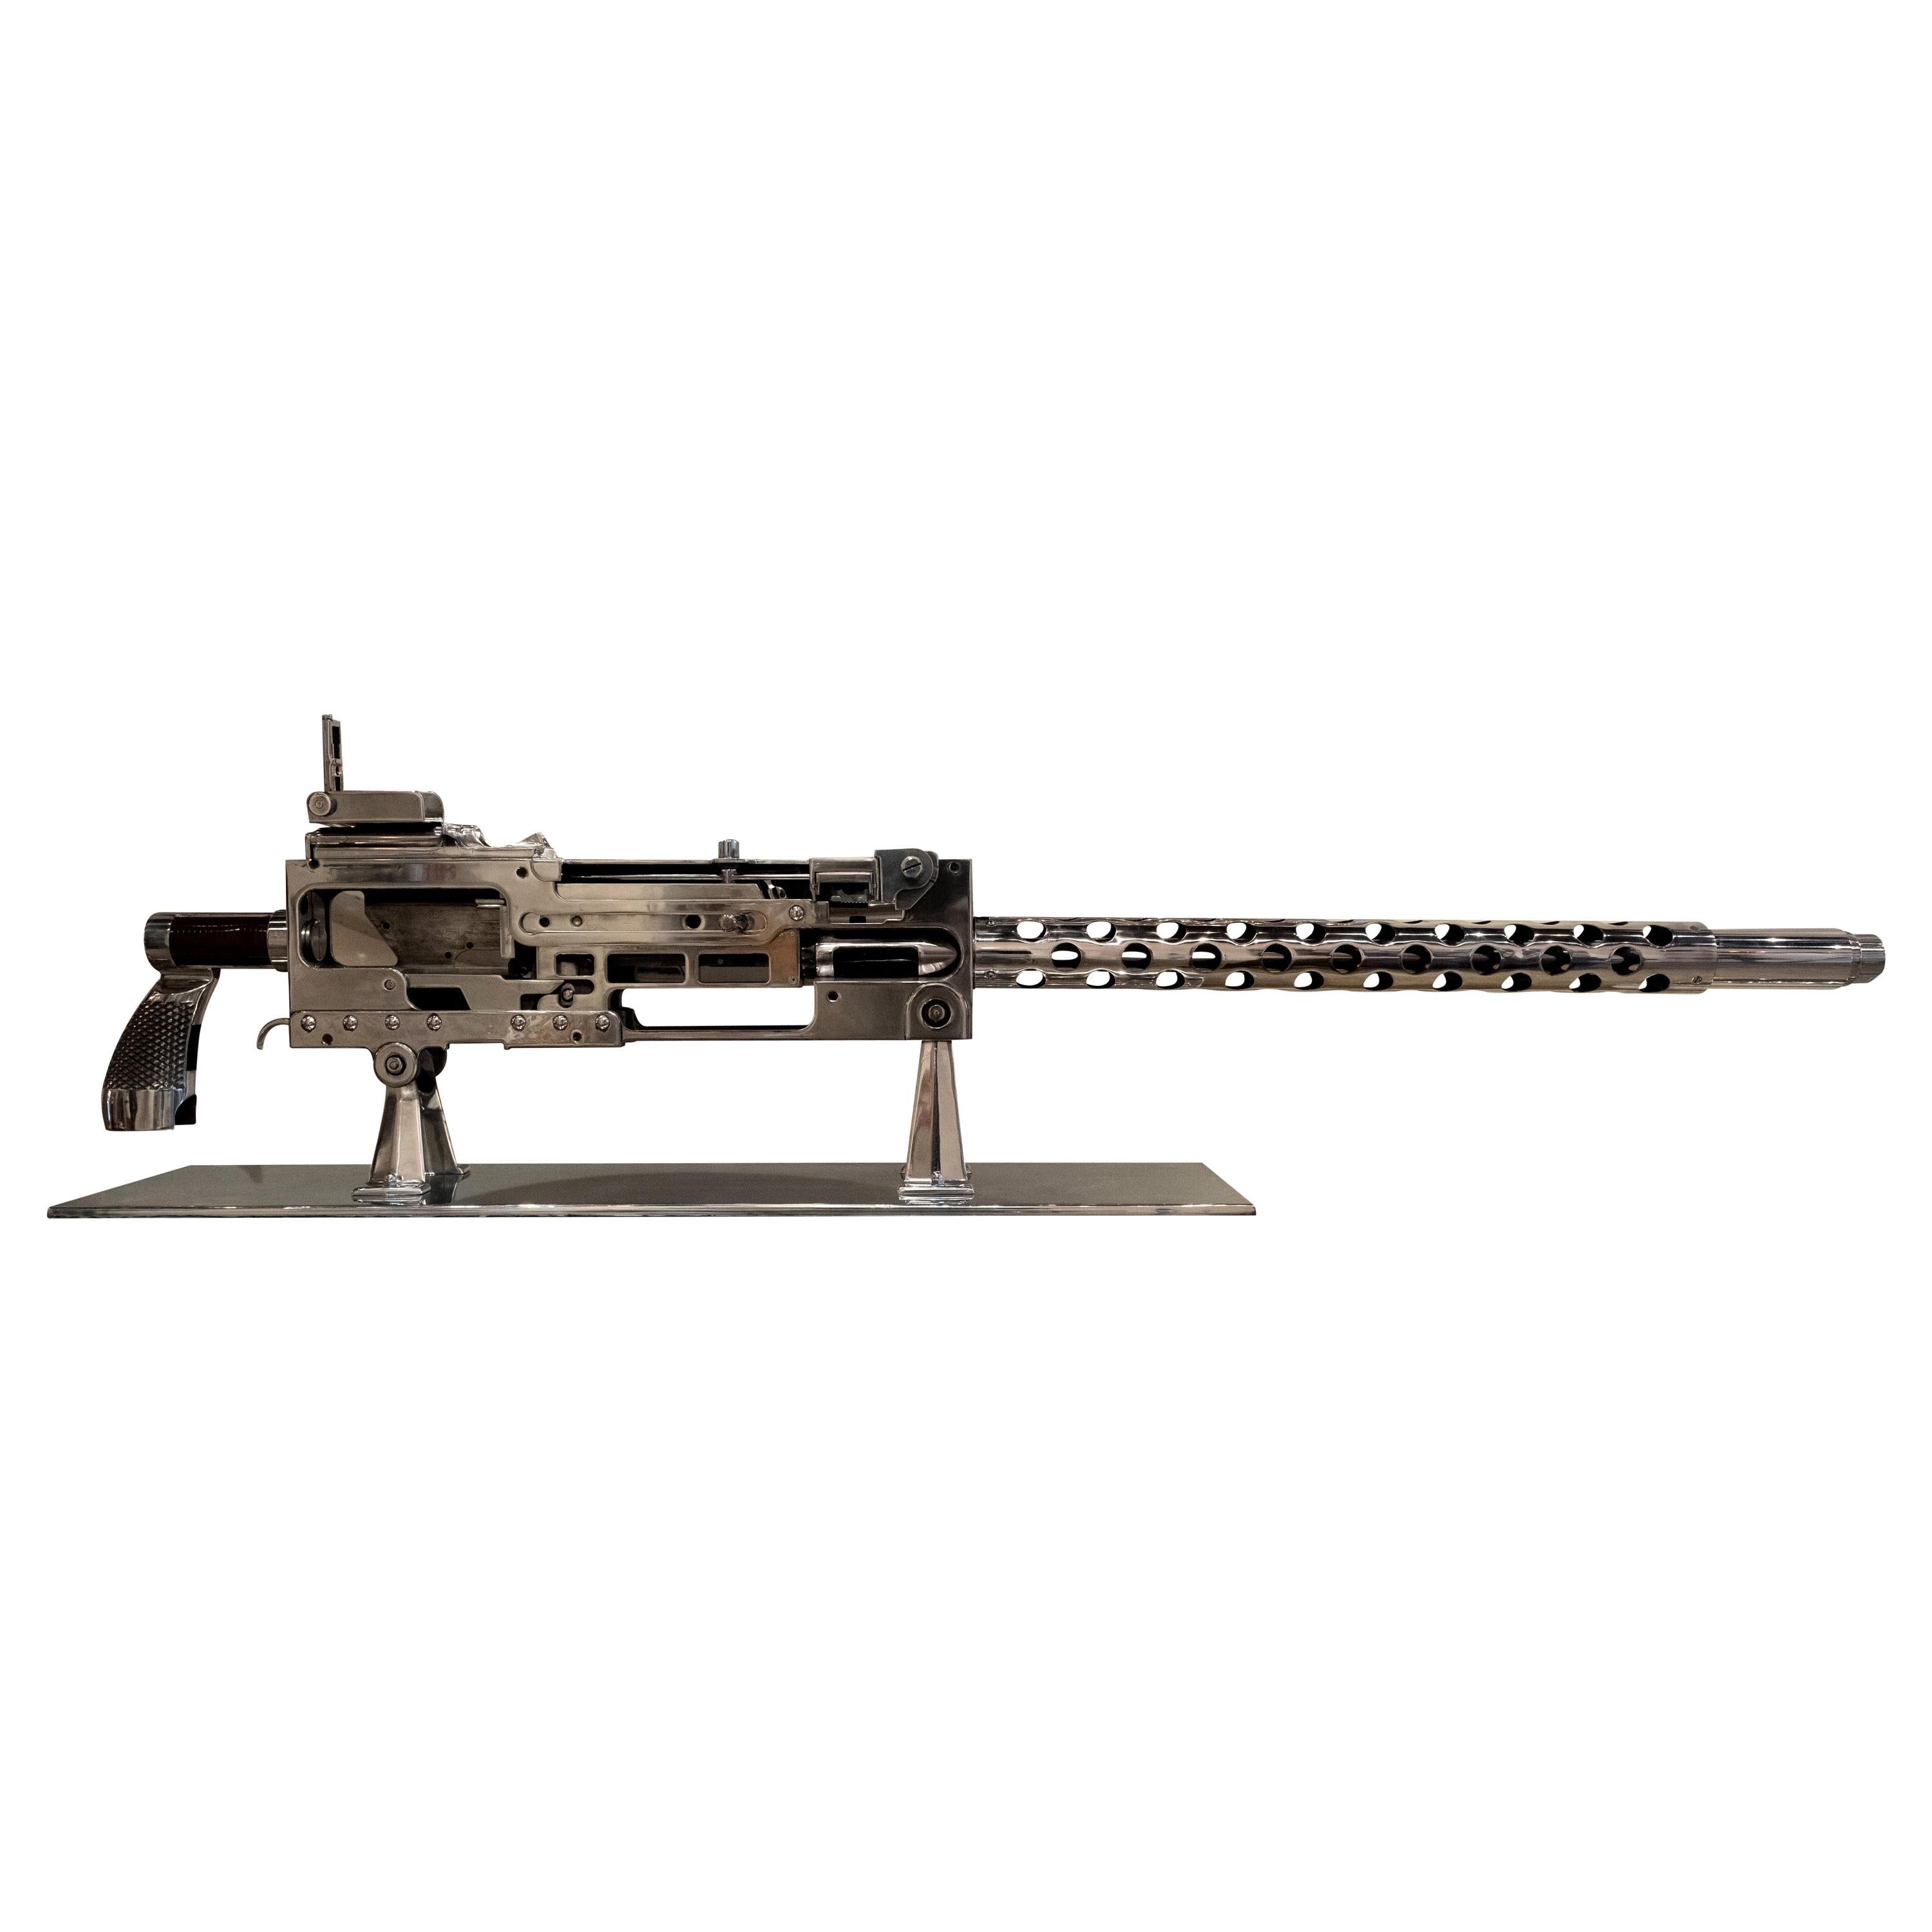 WWII Training Model of a Browning M1919 .30 Caliber Machine Gun For Sale